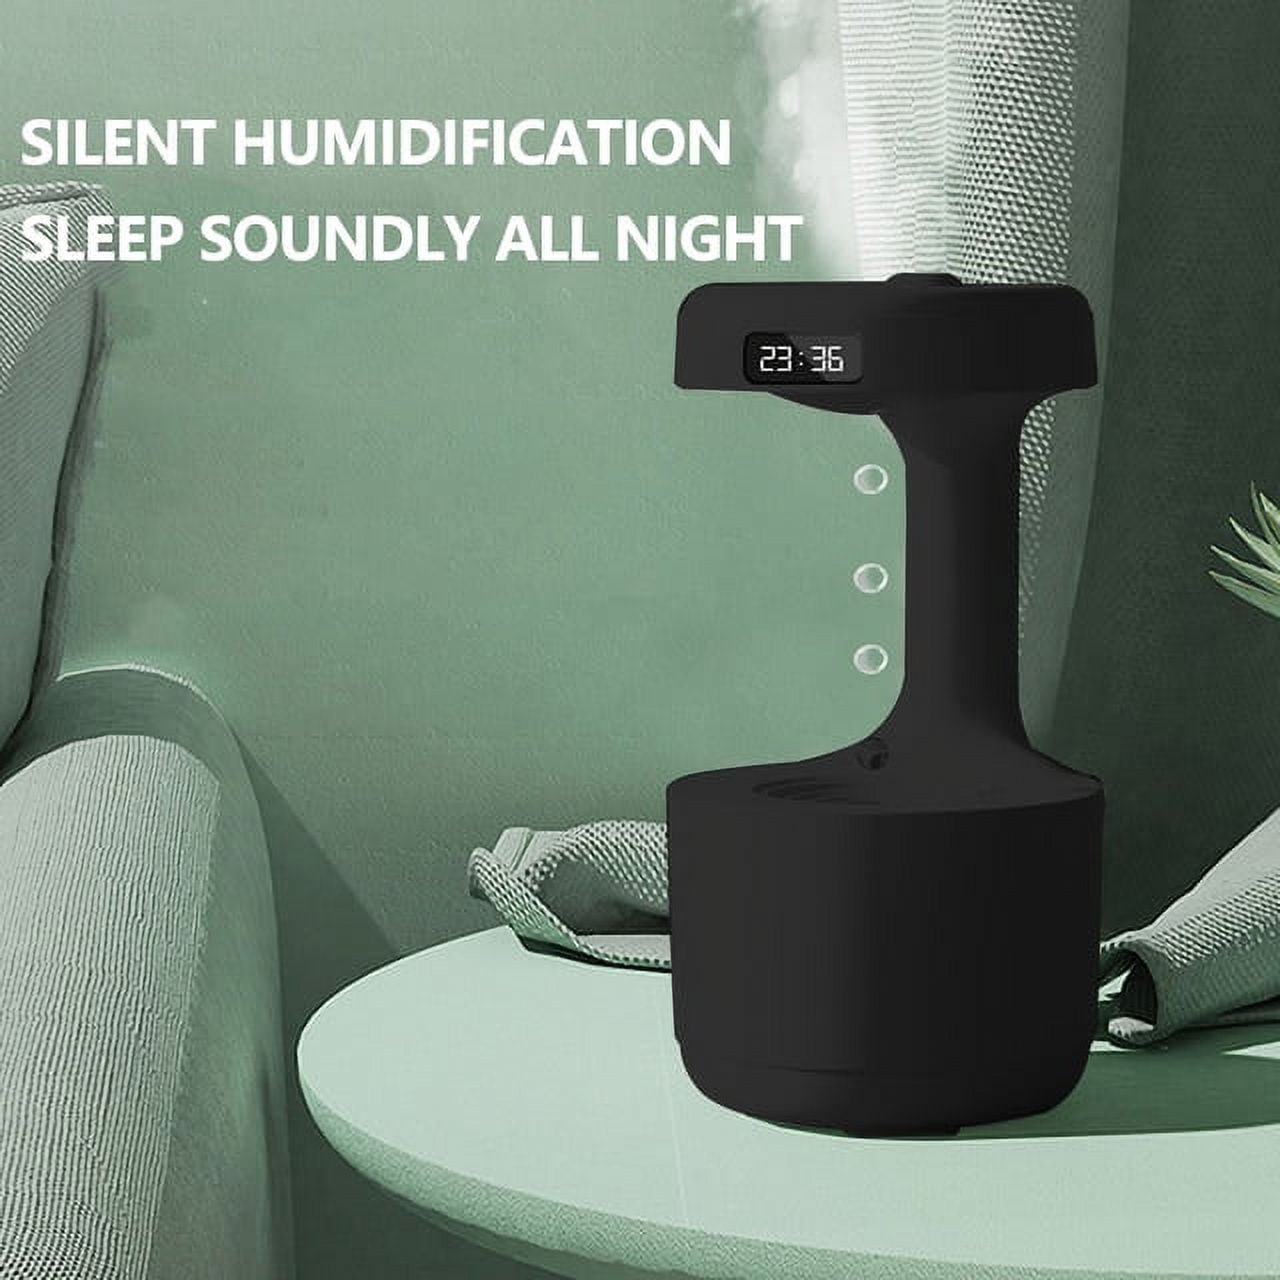 AuraDecor Anti-Gravity Water Droplet Humidifier Night Light for